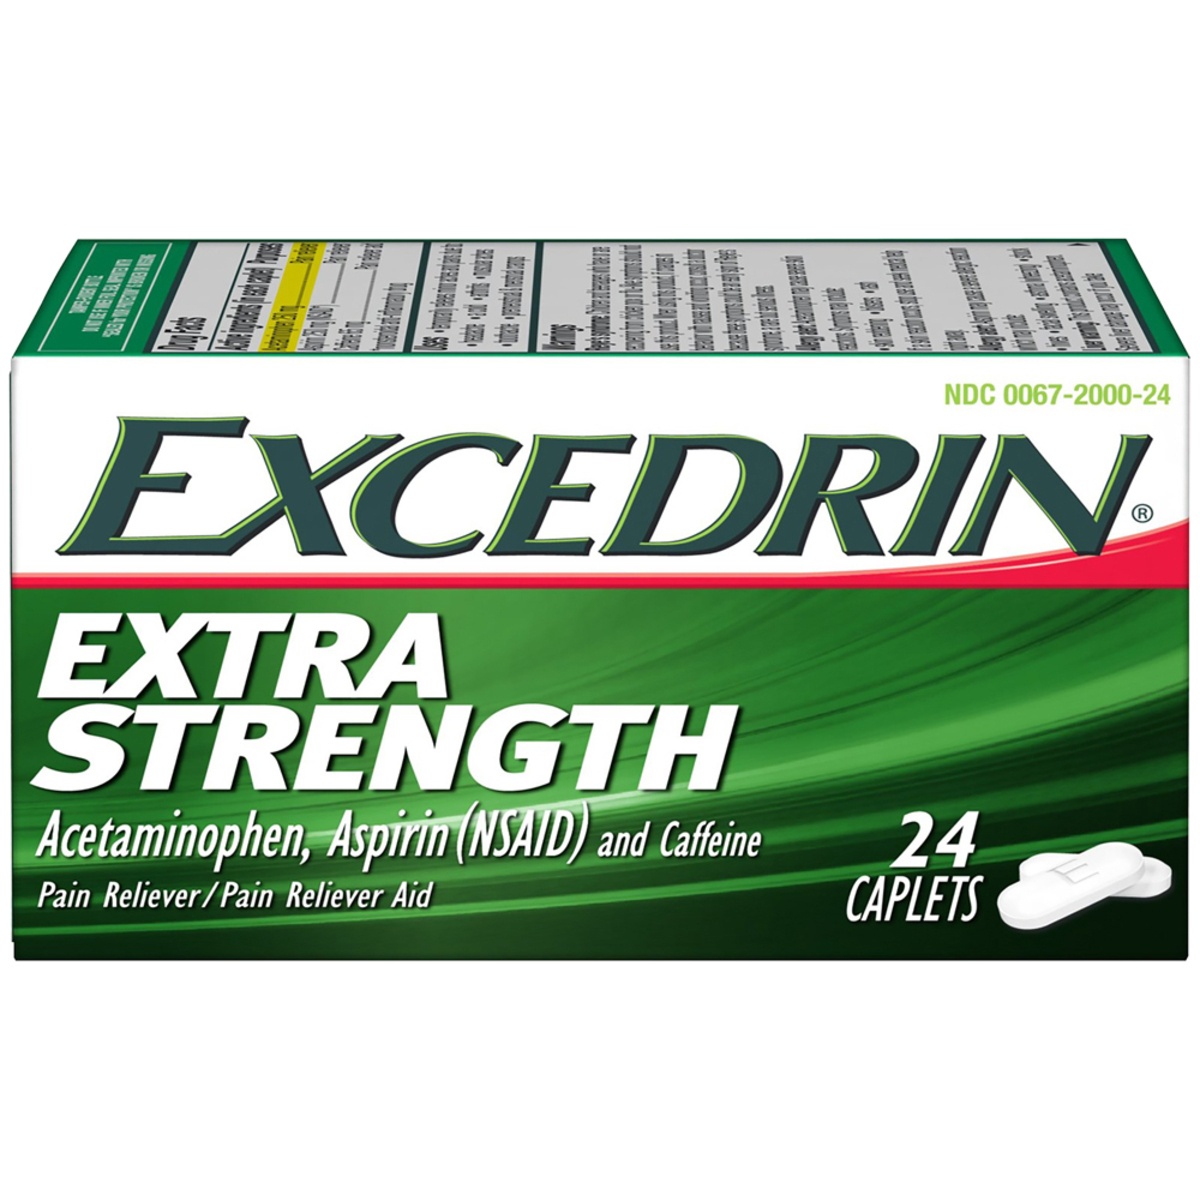 slide 1 of 1, Excedrin Extra Strength Caplets for Headache Pain Relief, 24 count, 24 ct